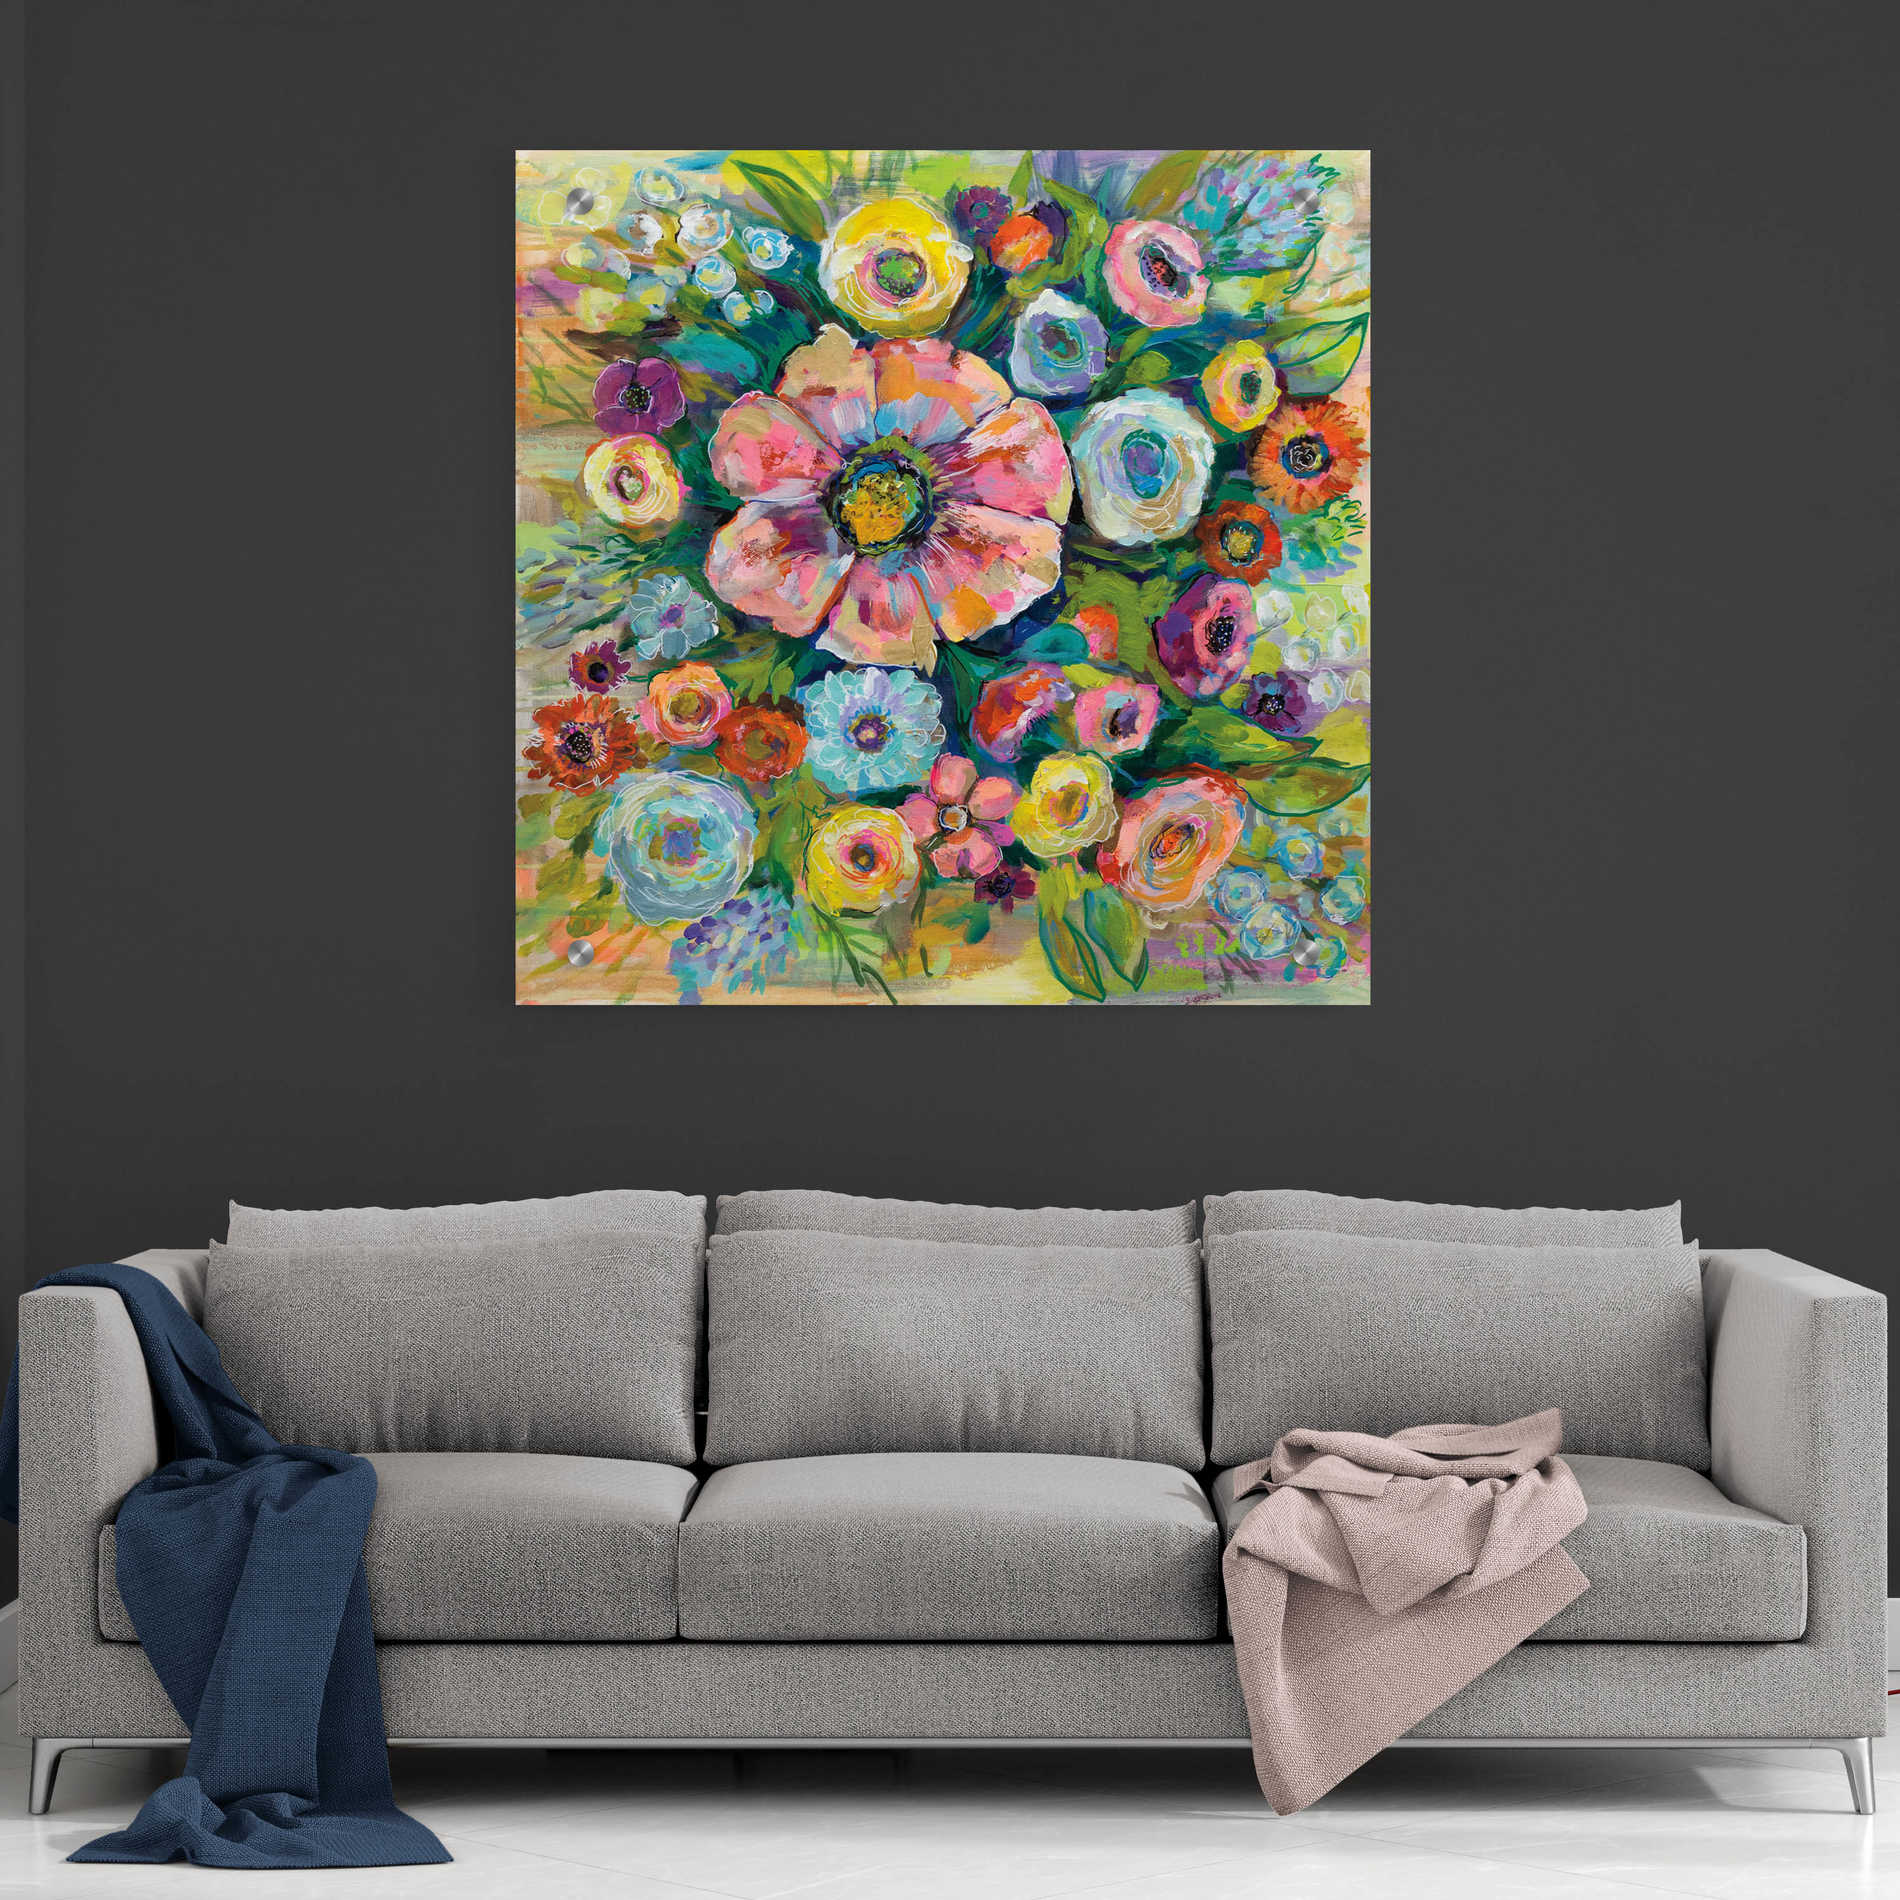 Epic Art 'Floral Fireworks' by Jeanette Vertentes, Acrylic Glass Wall Art,36x36